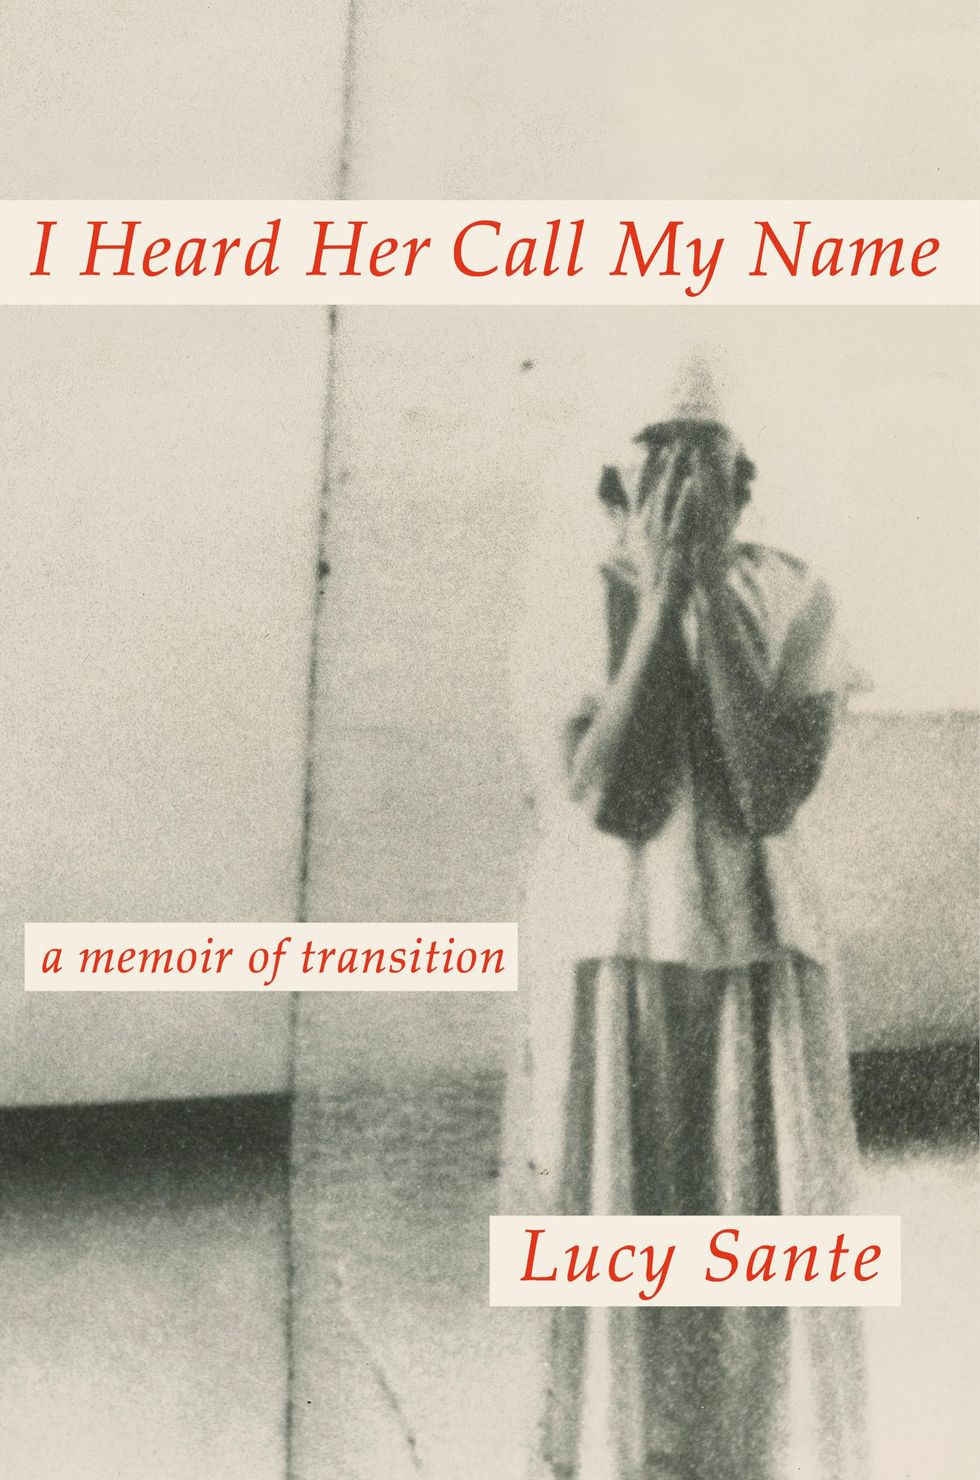 I Heard Her Call My Name, by Lucy Sante